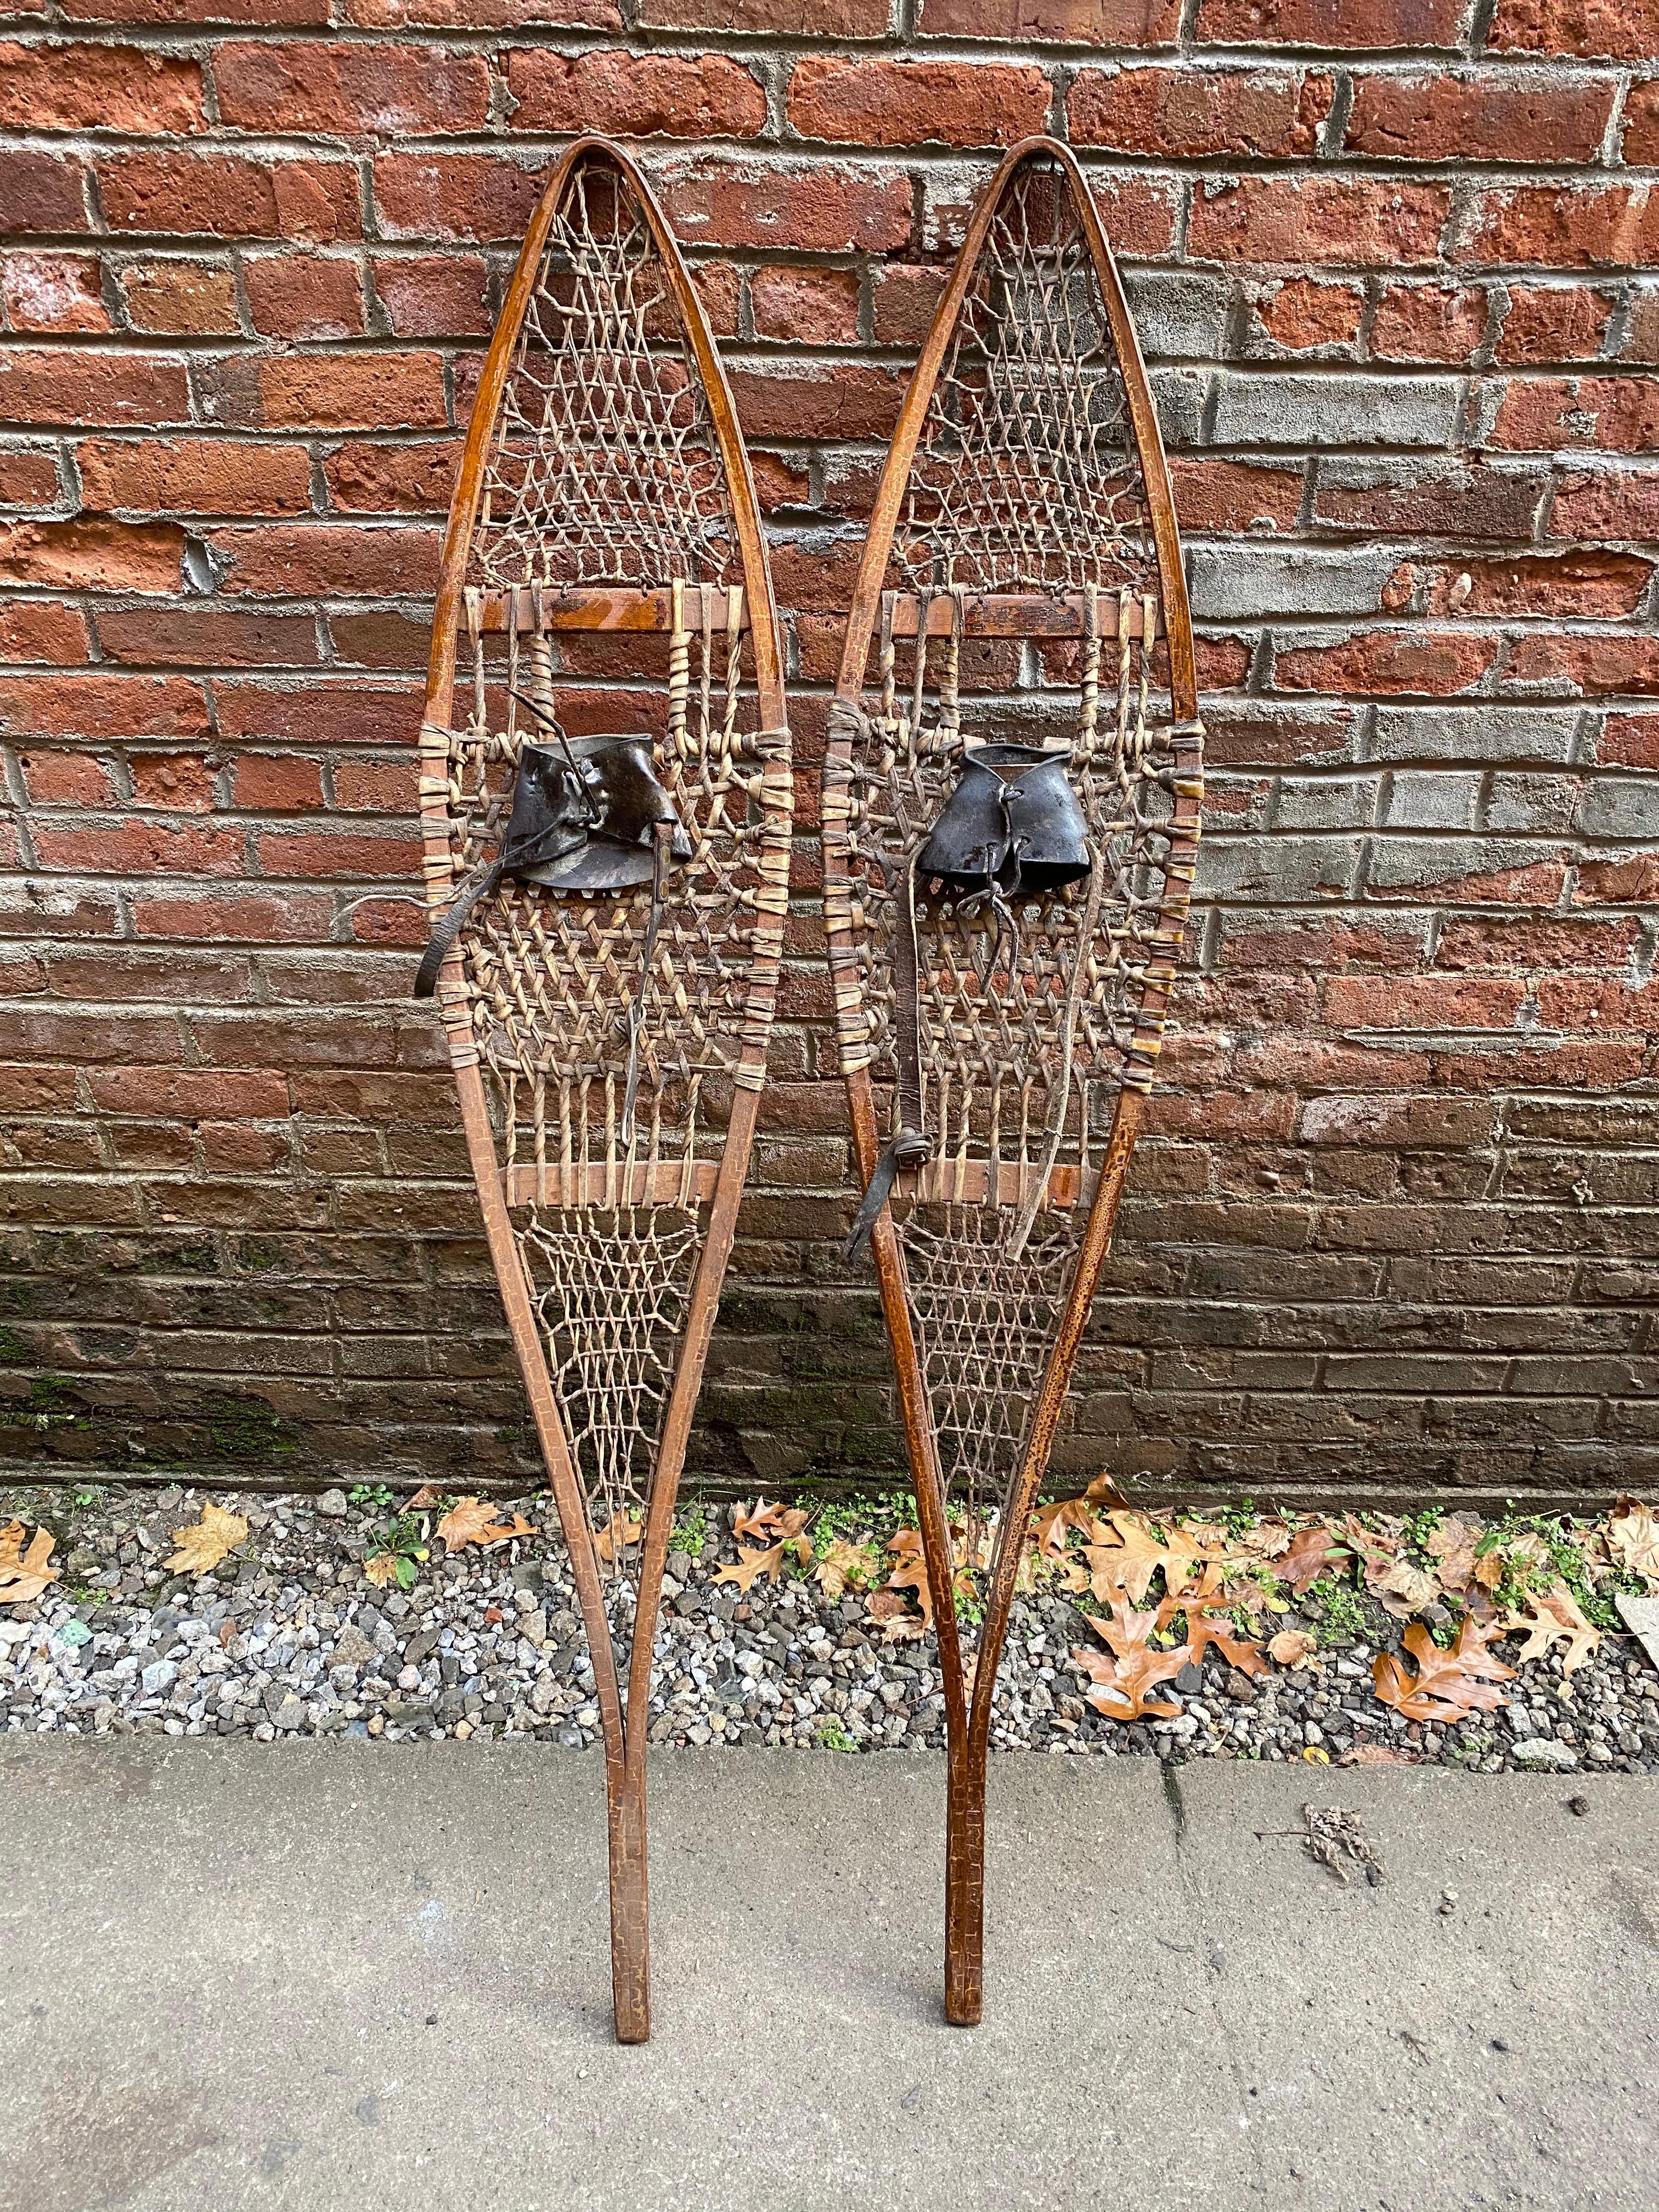 A beautiful pair of vintage Tubbs, Norway, Maine ash and rawhide snow shoes. Weathered, worn and used, they bare the right patina and wear as an excellent wall mounting or conversation piece. One shoe still retains a partial transfer decal: The